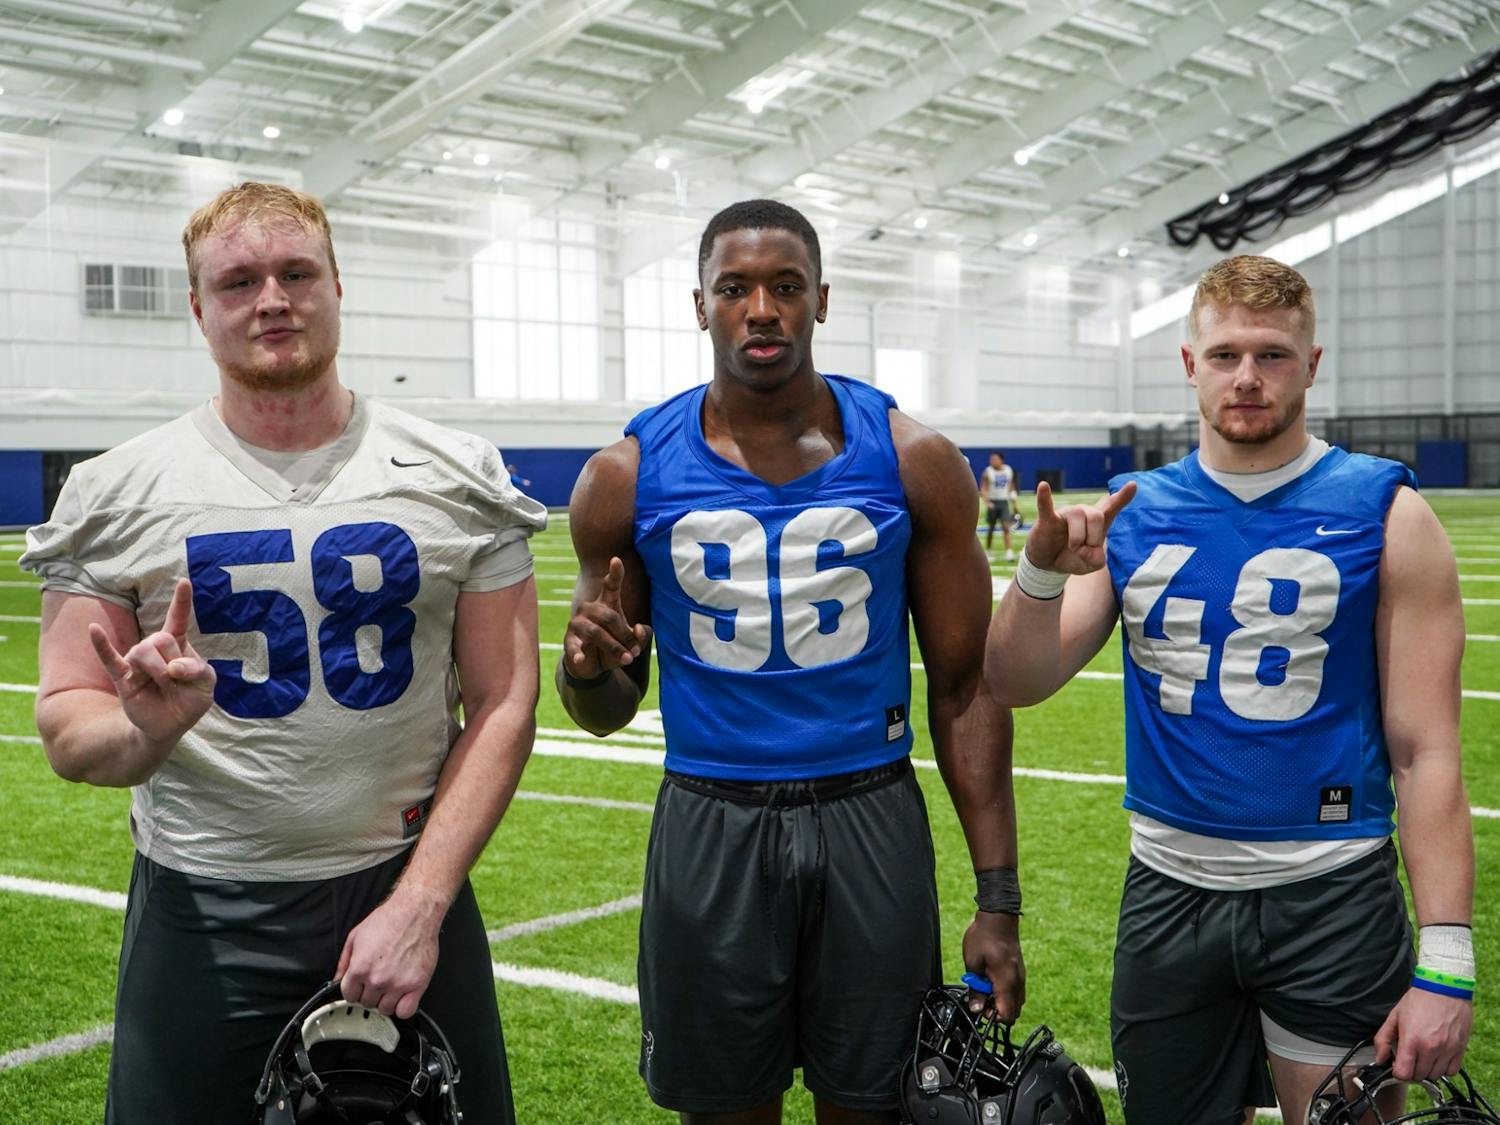 Offensive lineman Alain Schaerer (left), defensive end Jordan Avissey (middle), and linebacker Fabian Weitz (right) speak about their experiences being the only three members on the team from Europe in the fieldhouse on Tuesday.